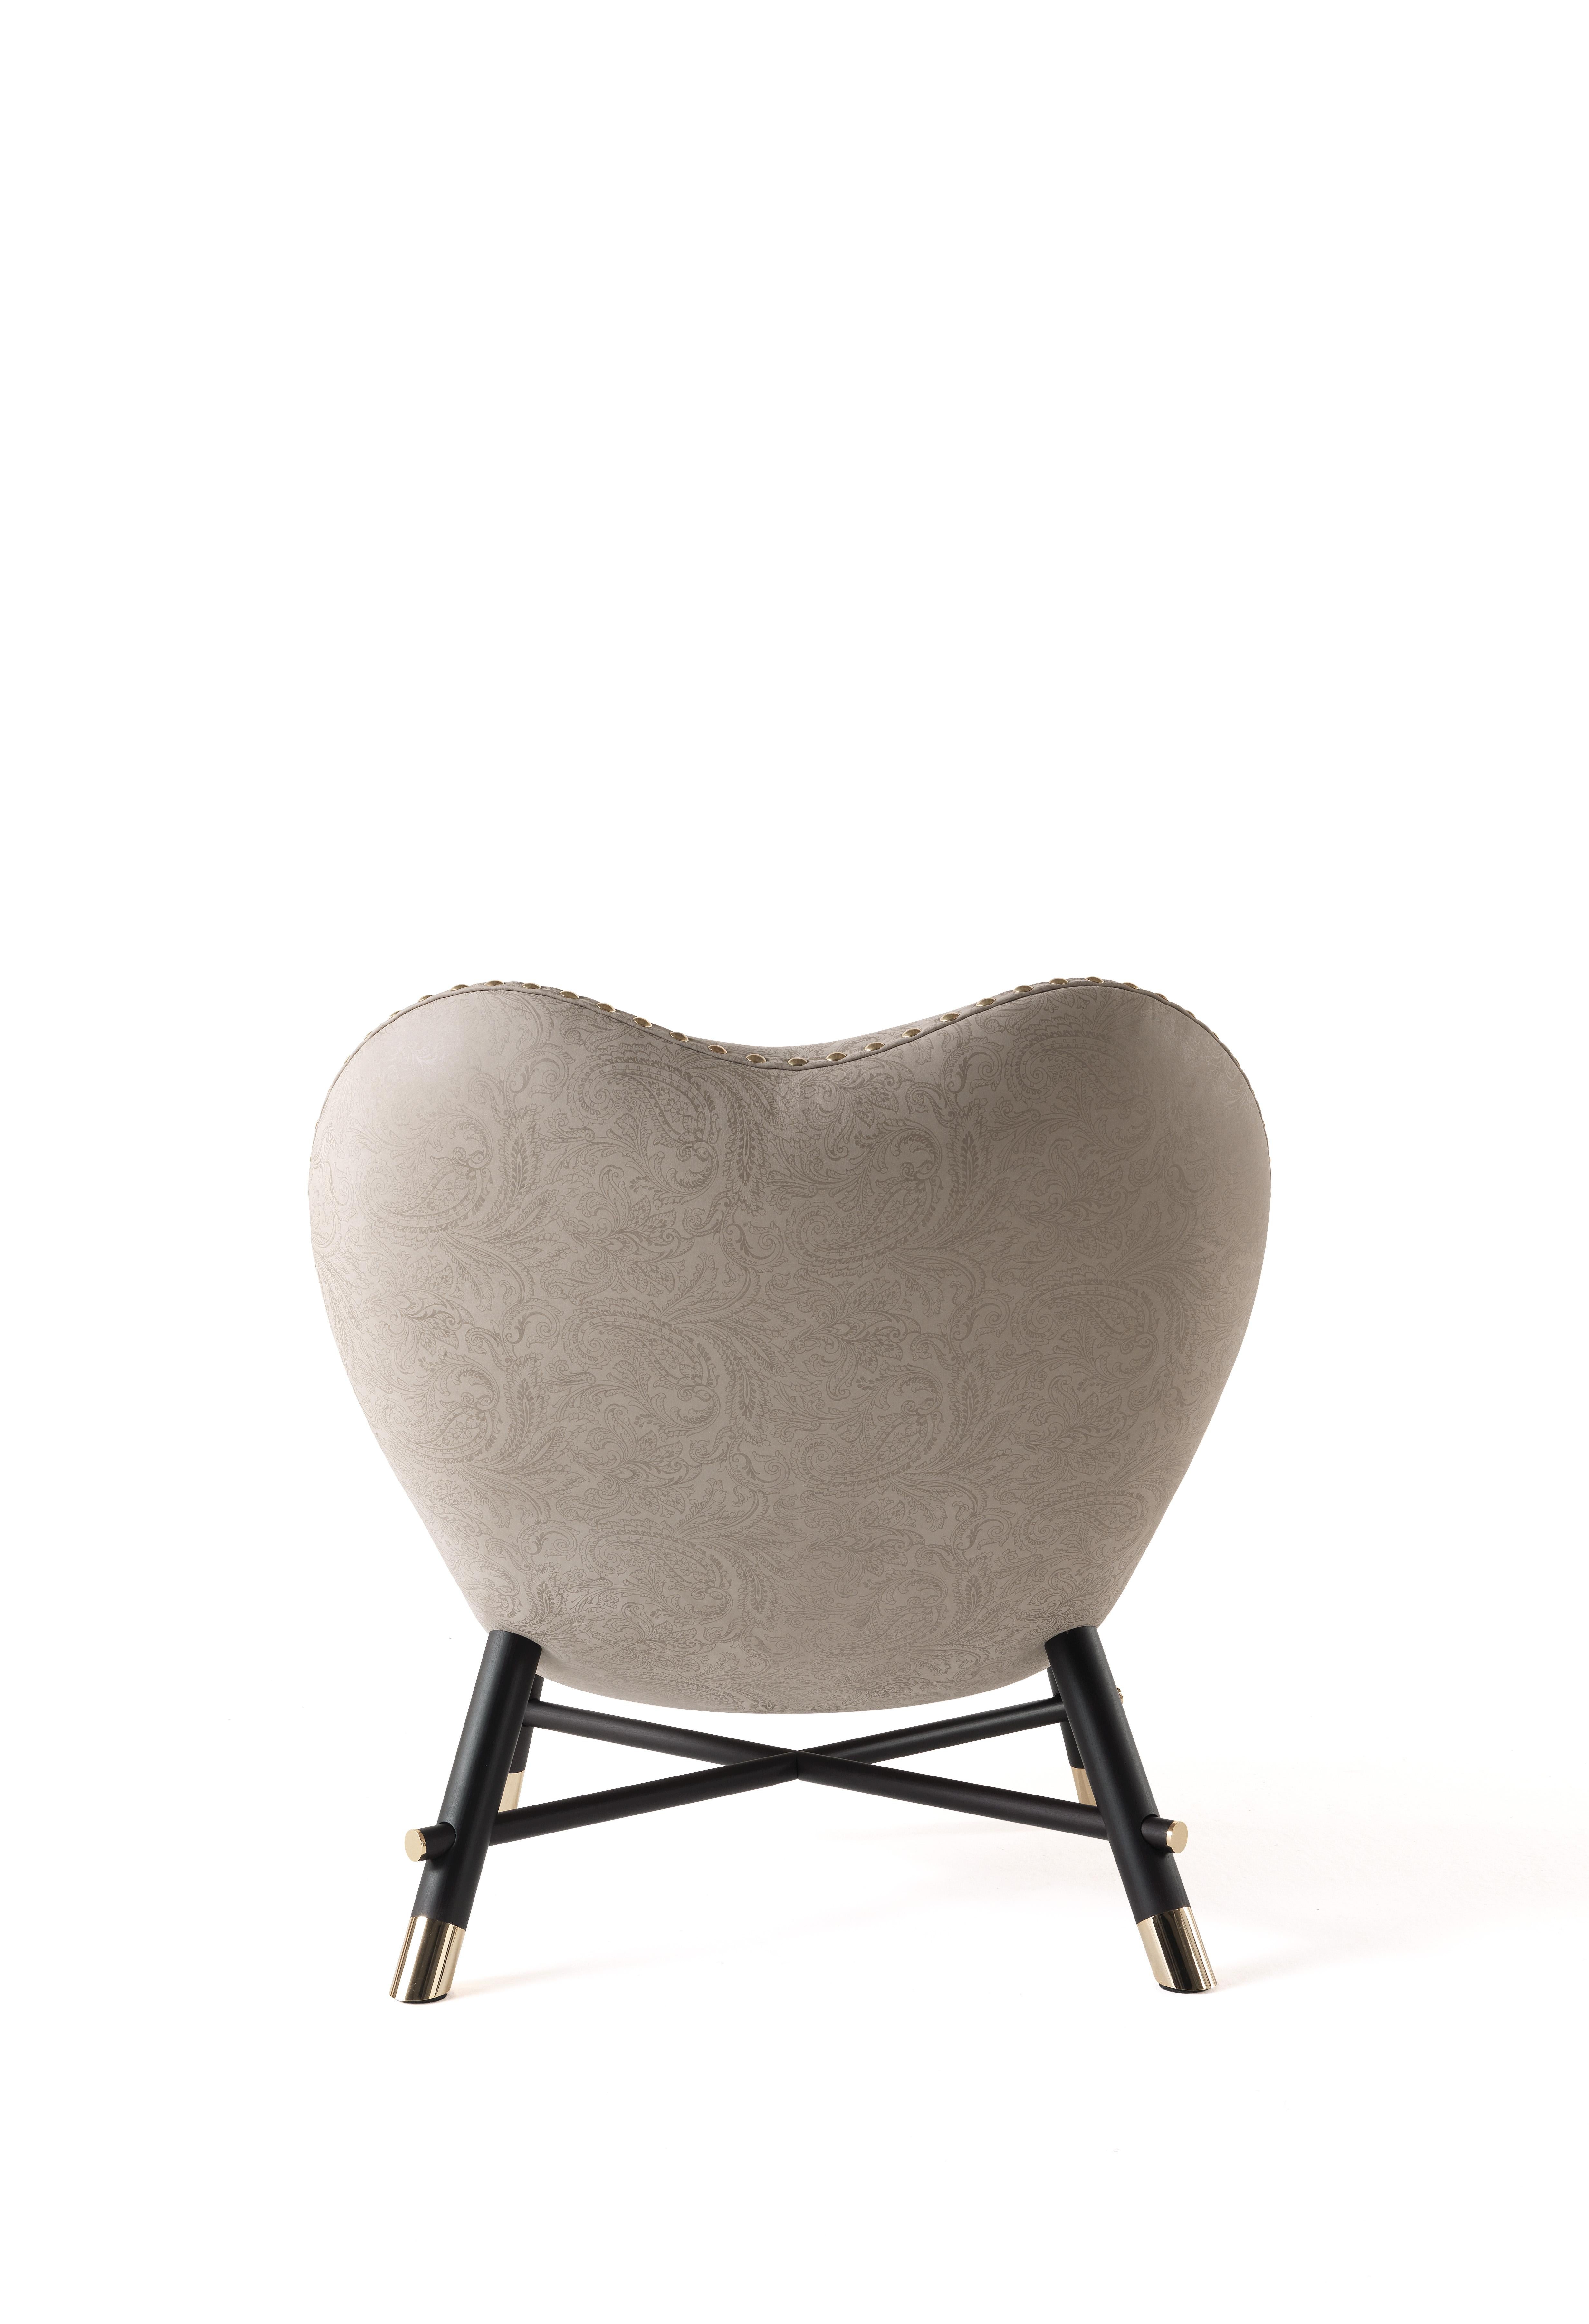 Italian 21st Century Kush Armchair in Leather by Etro Home Interiors For Sale